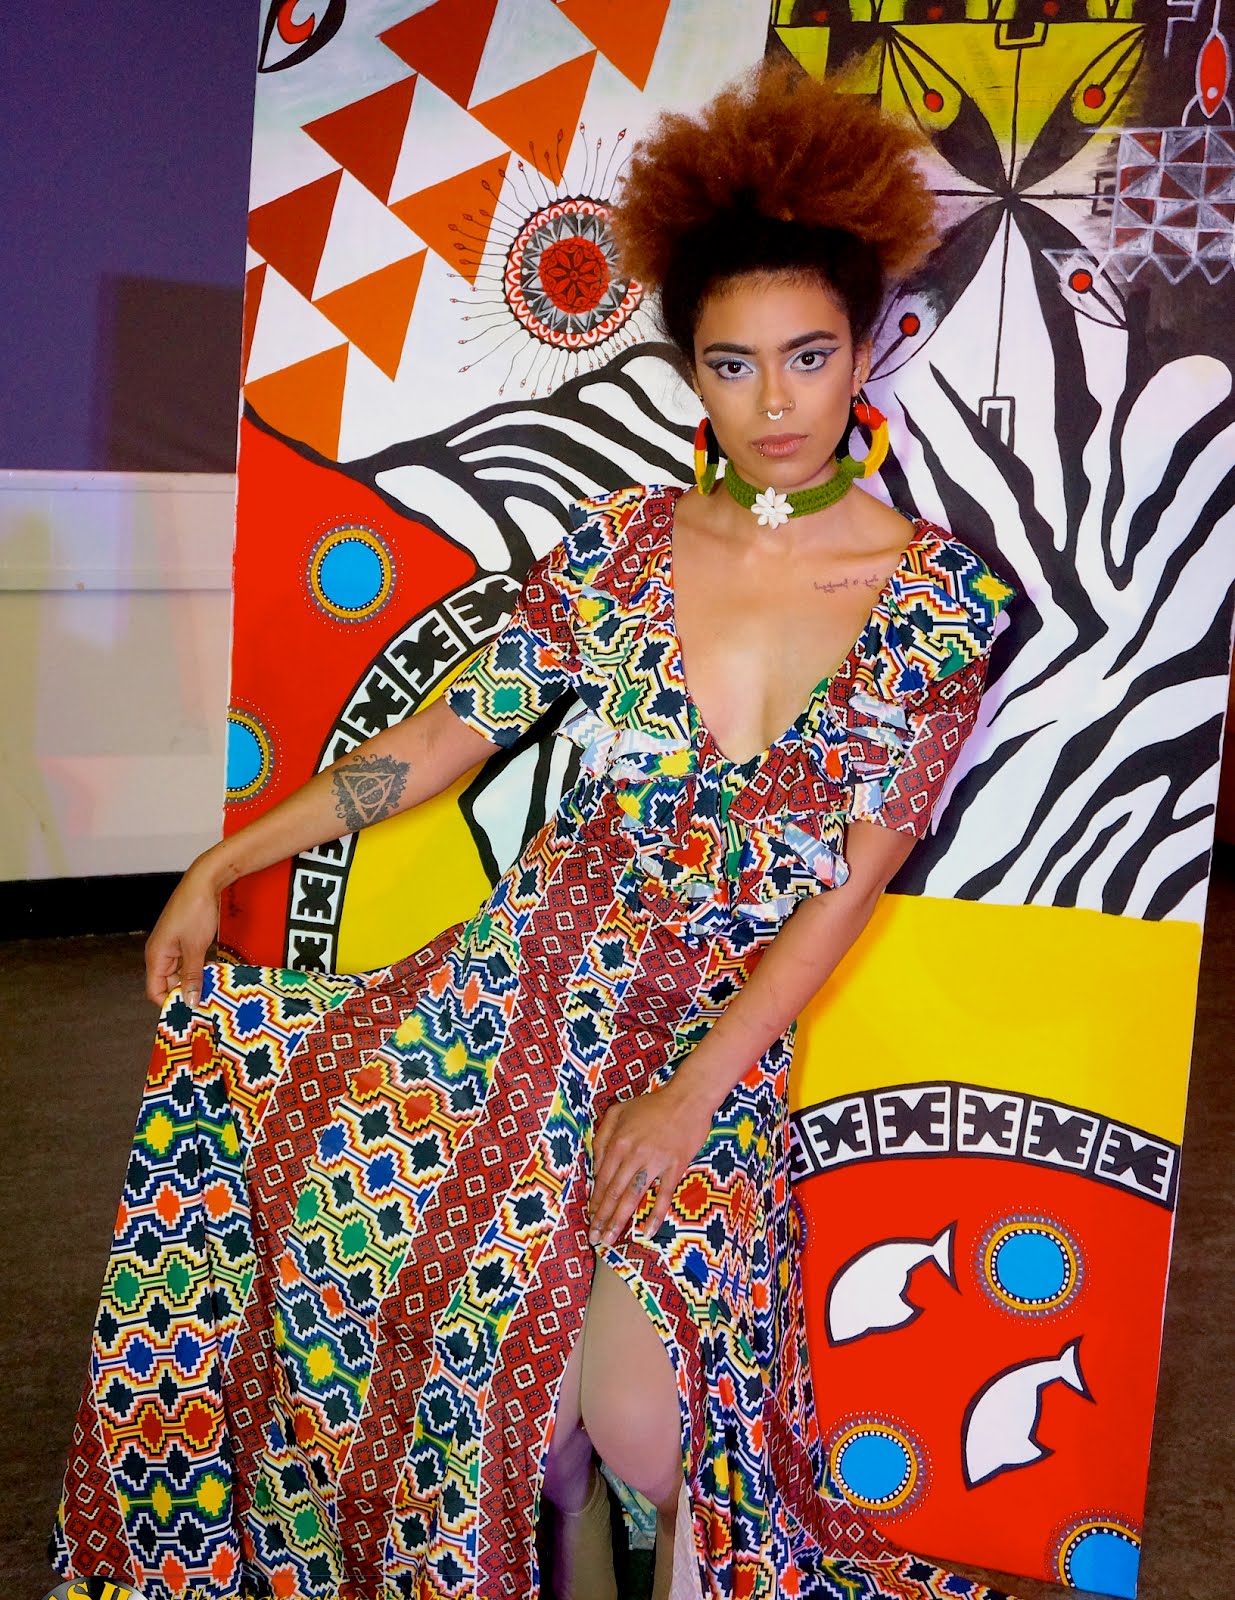 PNG Designer to showcase Fashion label in London, UK - One Papua New Guinea